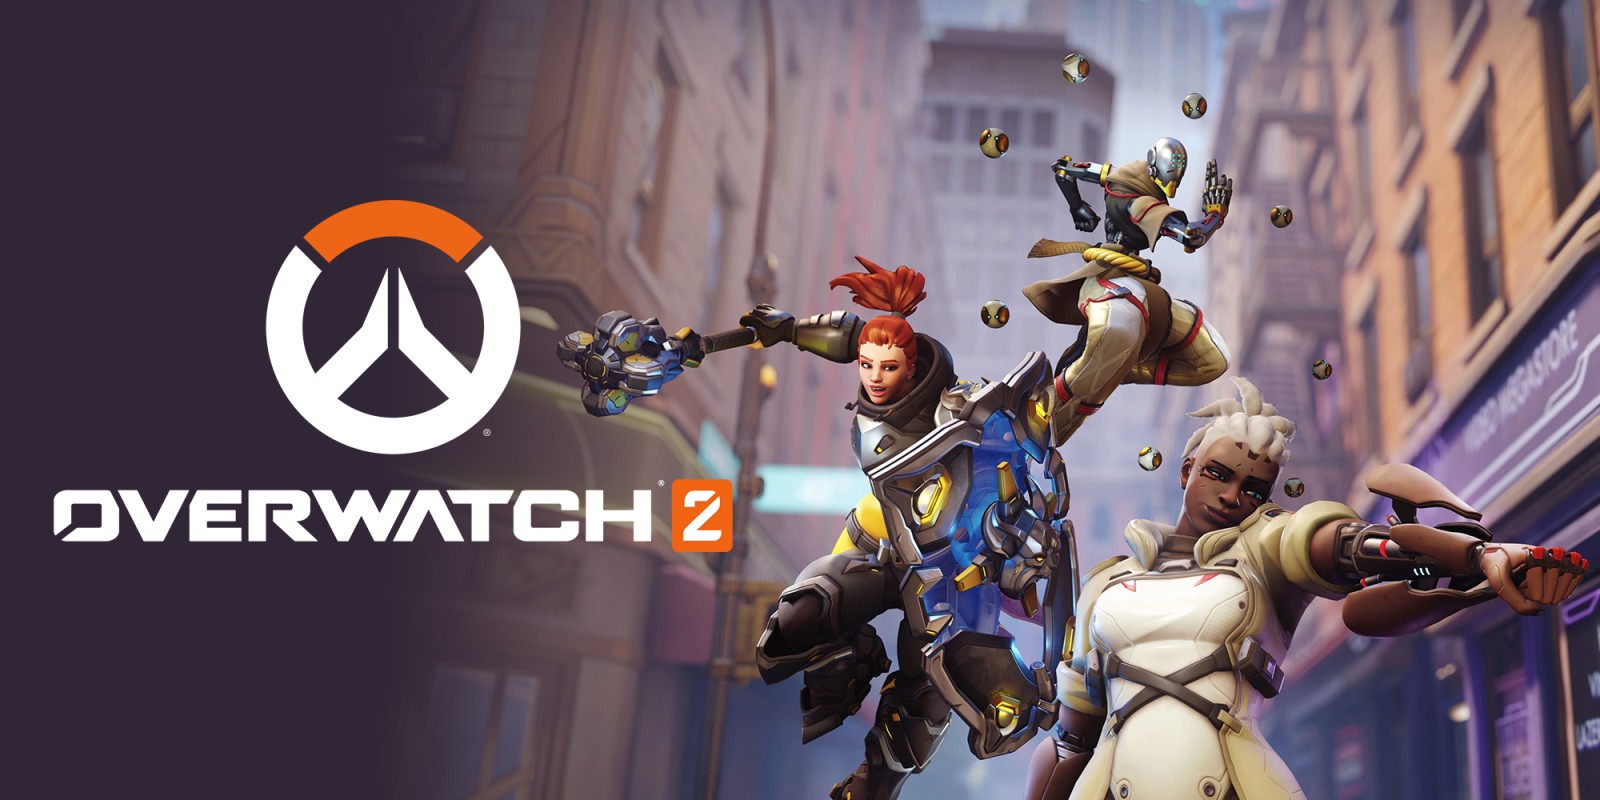 How to play Overwatch 2 without using a phone number?